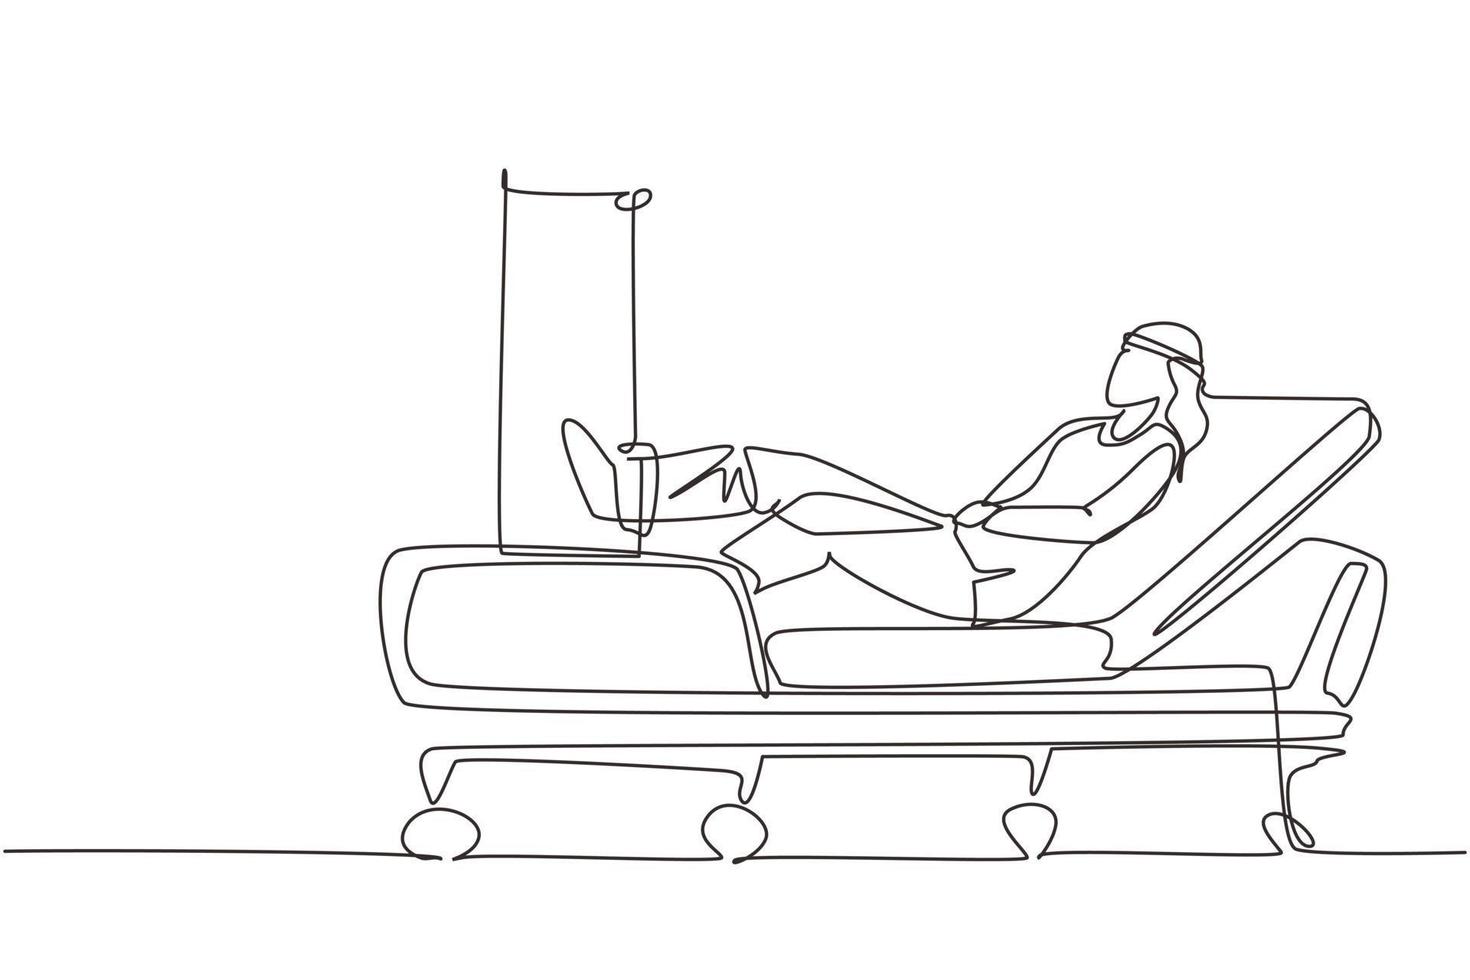 Single continuous line drawing woman patient with broken leg lying in hospital. Hospitalization of patient. Sick person is in bed. The leg is bandaged and fixed with cast. One line draw design vector